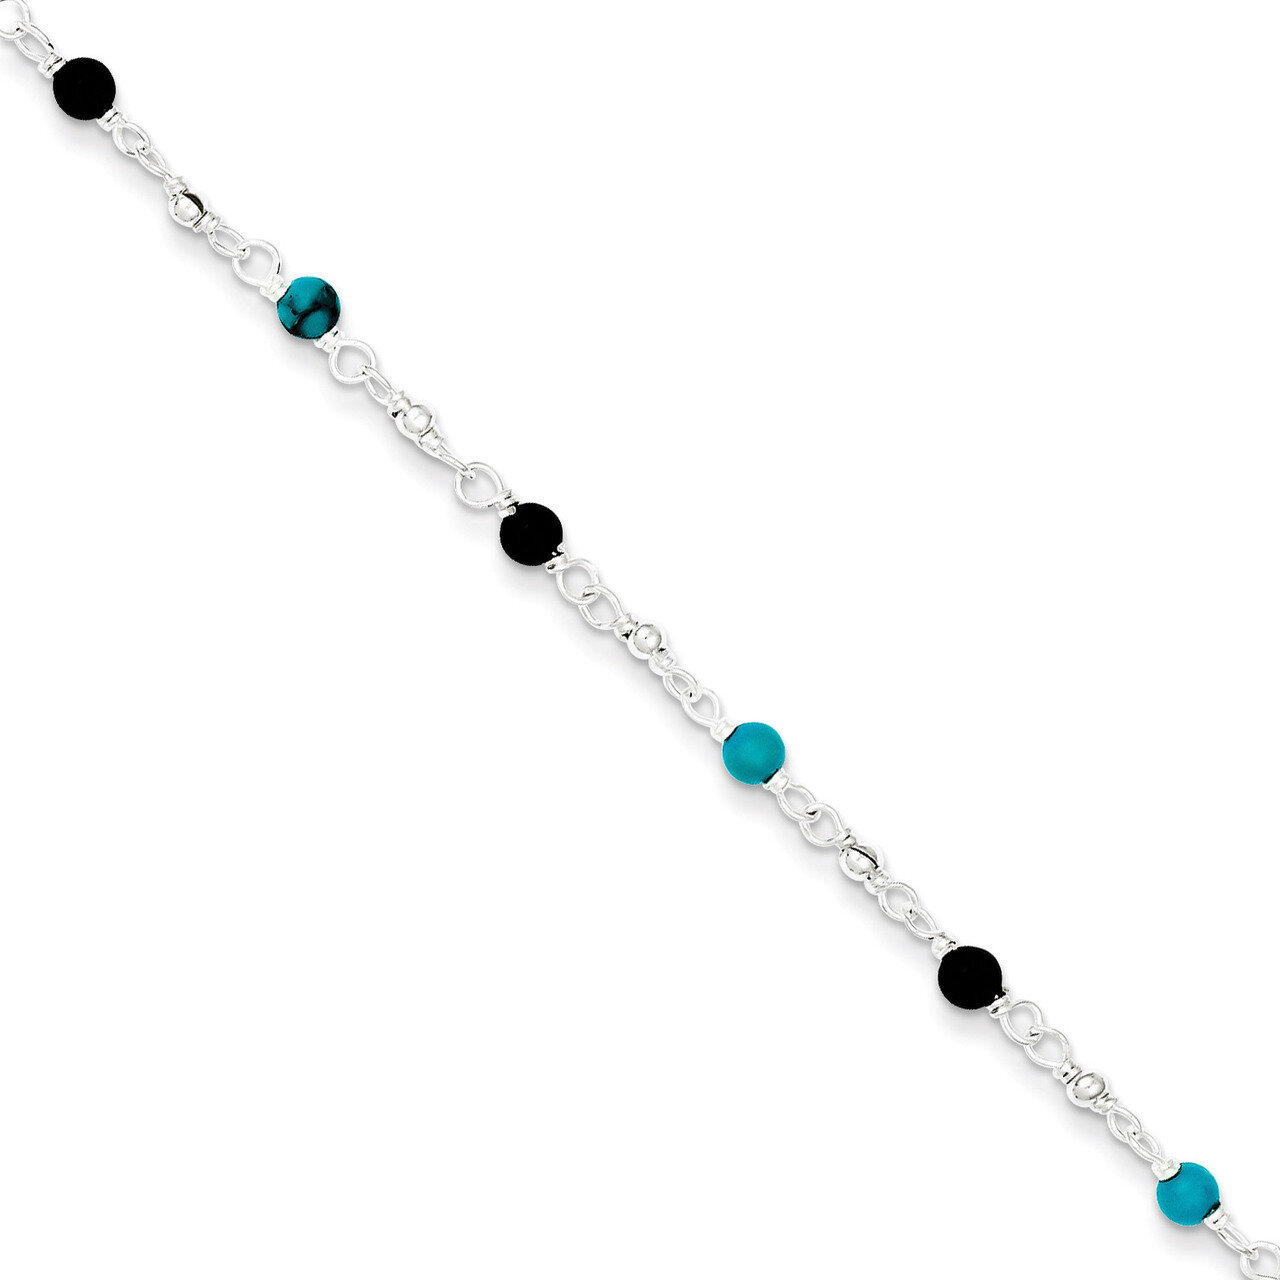 10 Inch Onyx Turquoise Anklet Bracelet Sterling Silver QG1395-10